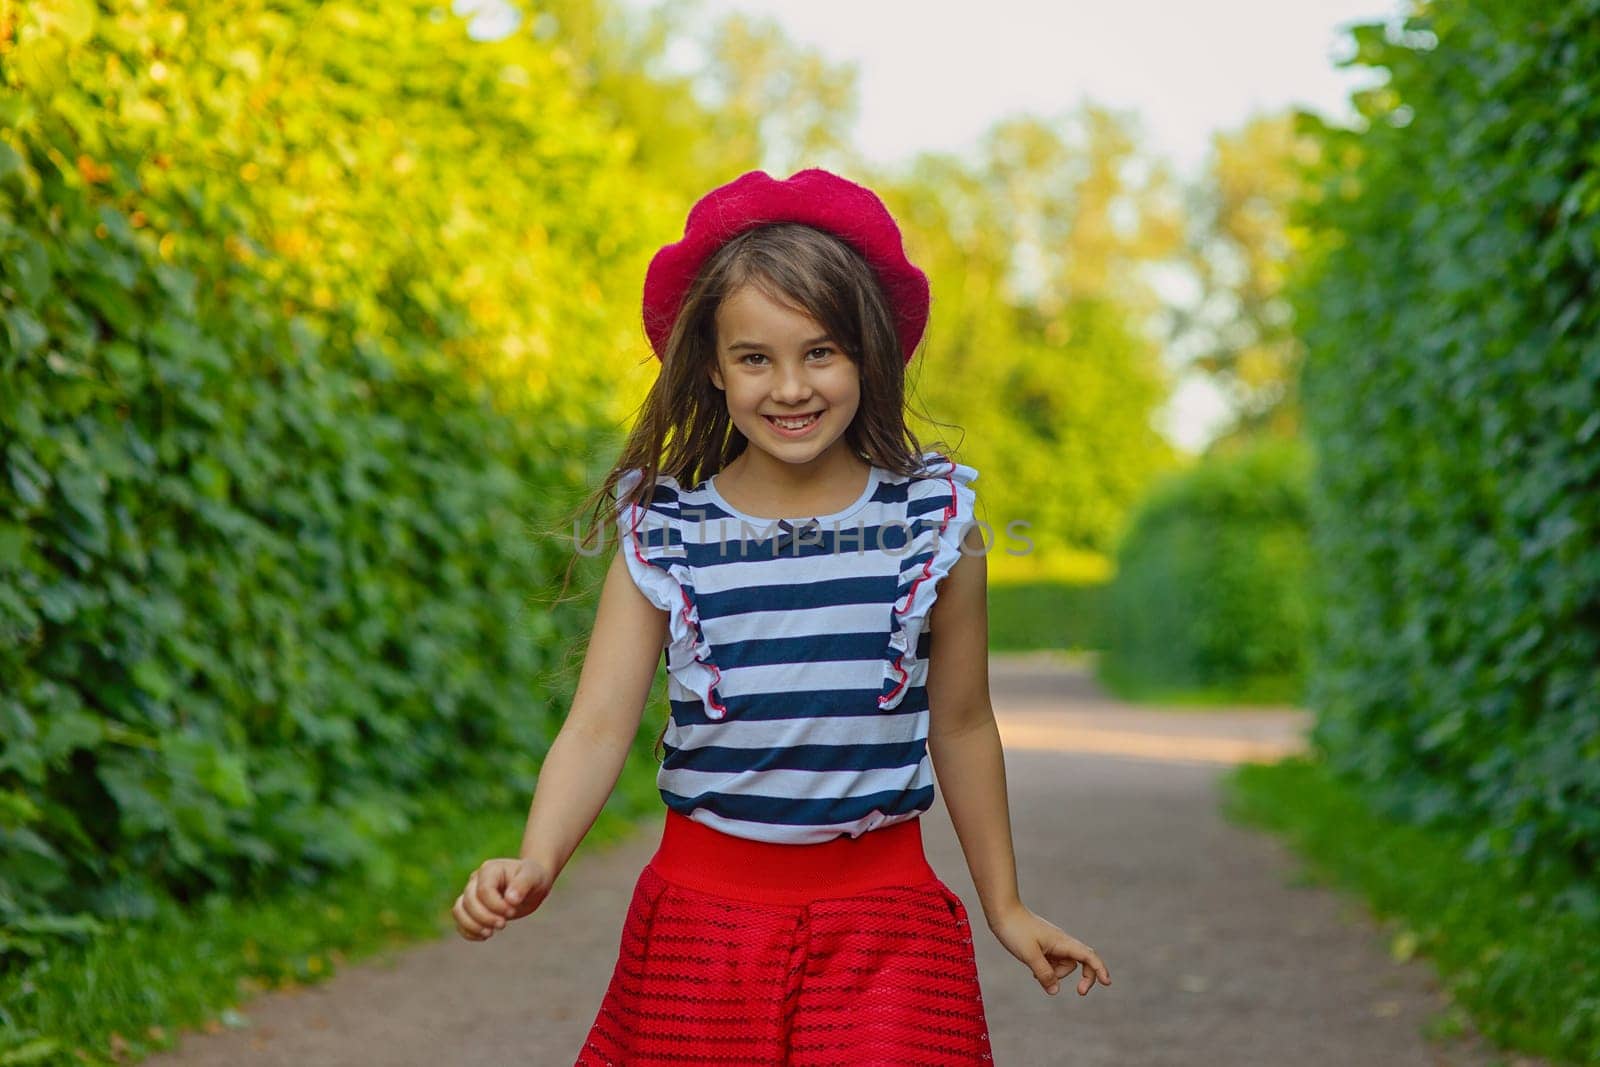 A portrait of a beautiful brunette in a red beret, red skirt, and a striped T-shirt runs among green leaves in the park. Copy space